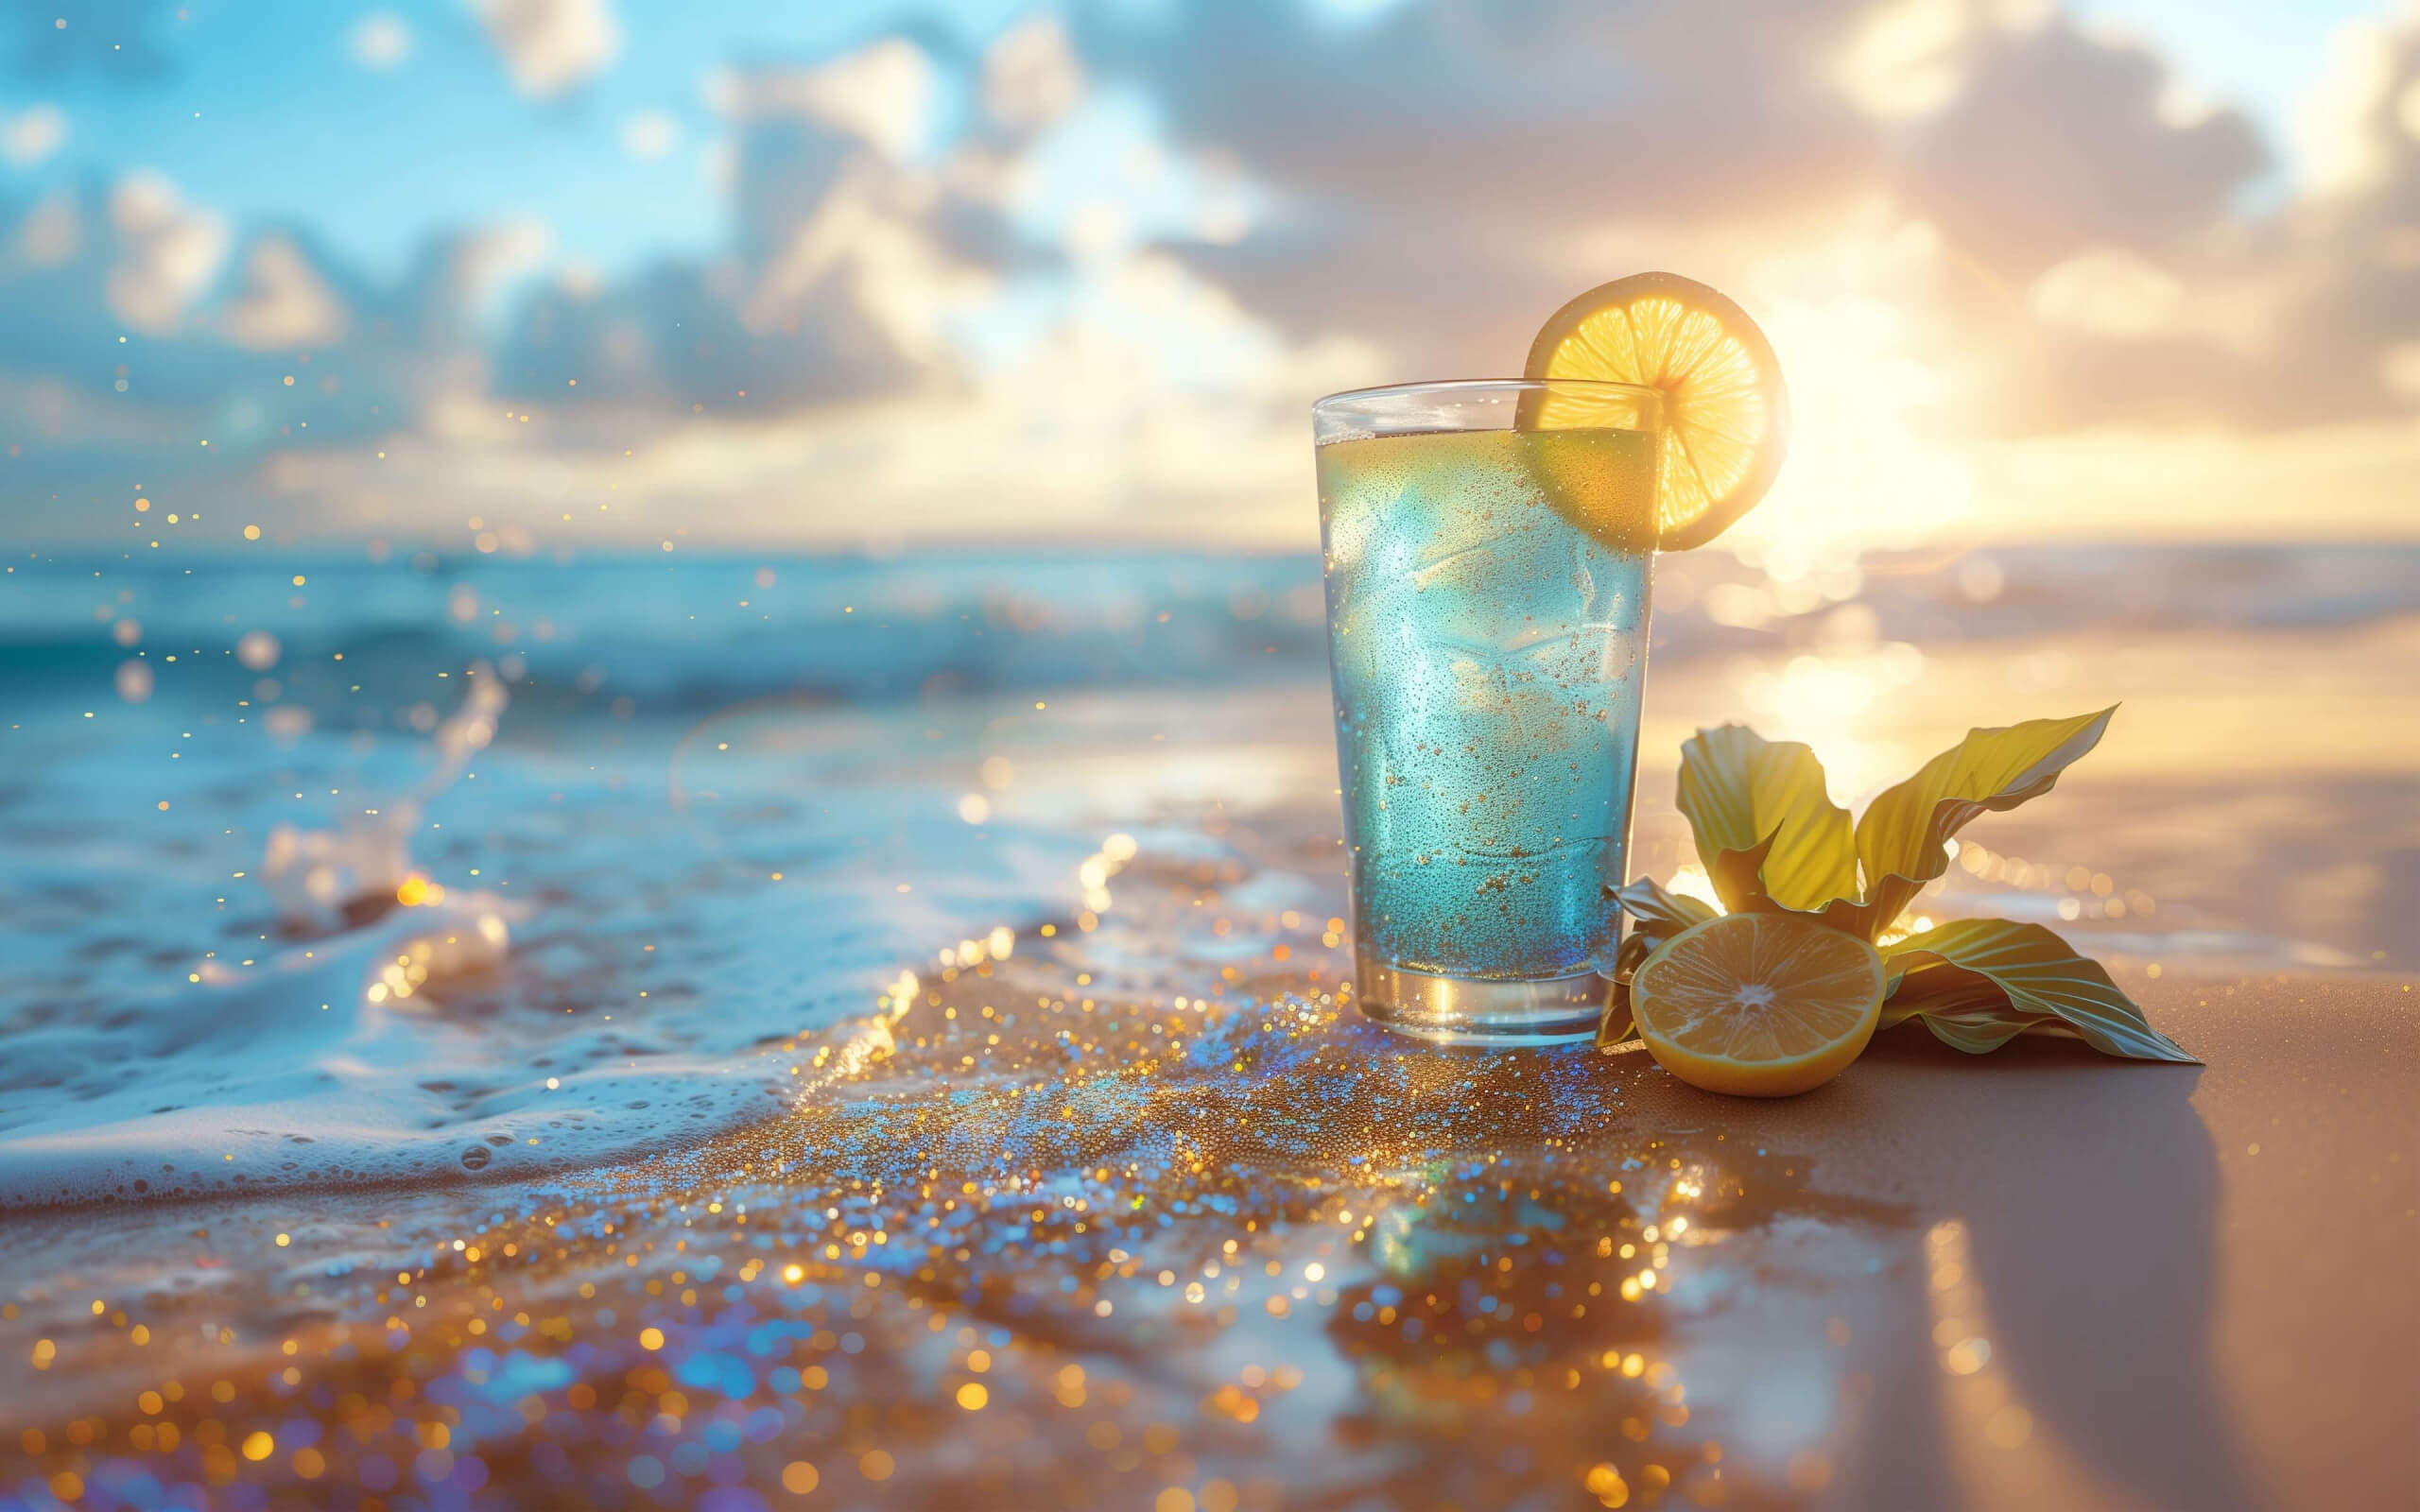 Cold drink on the ocean shore wallpaper 2560x1600